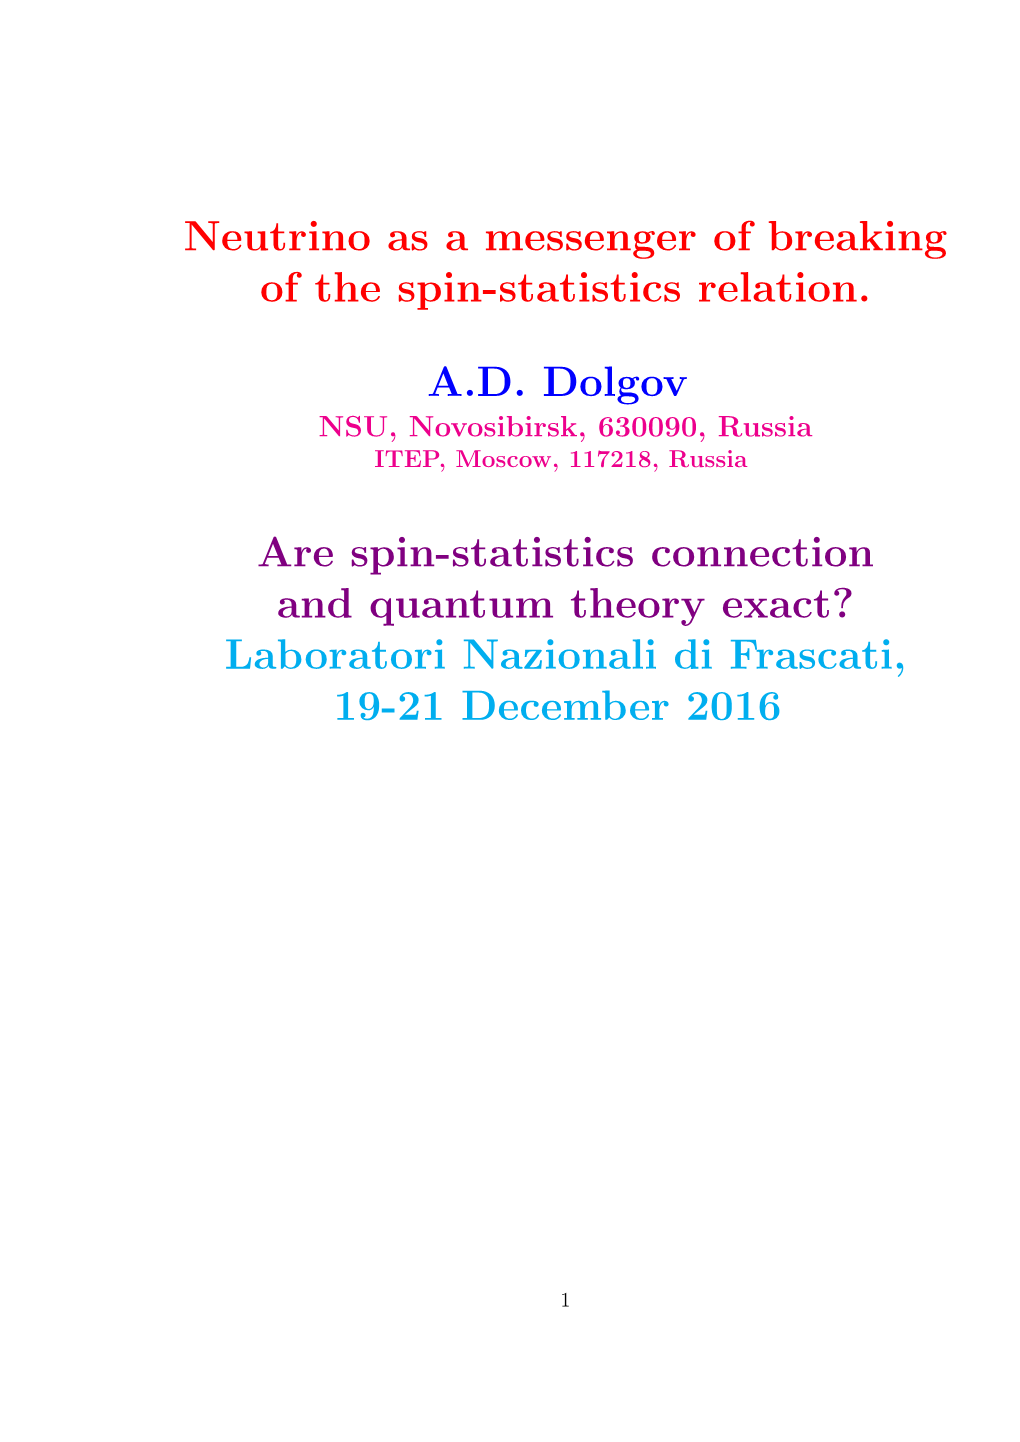 Neutrino As a Messenger of Breaking of the Spin-Statistics Relation. A.D